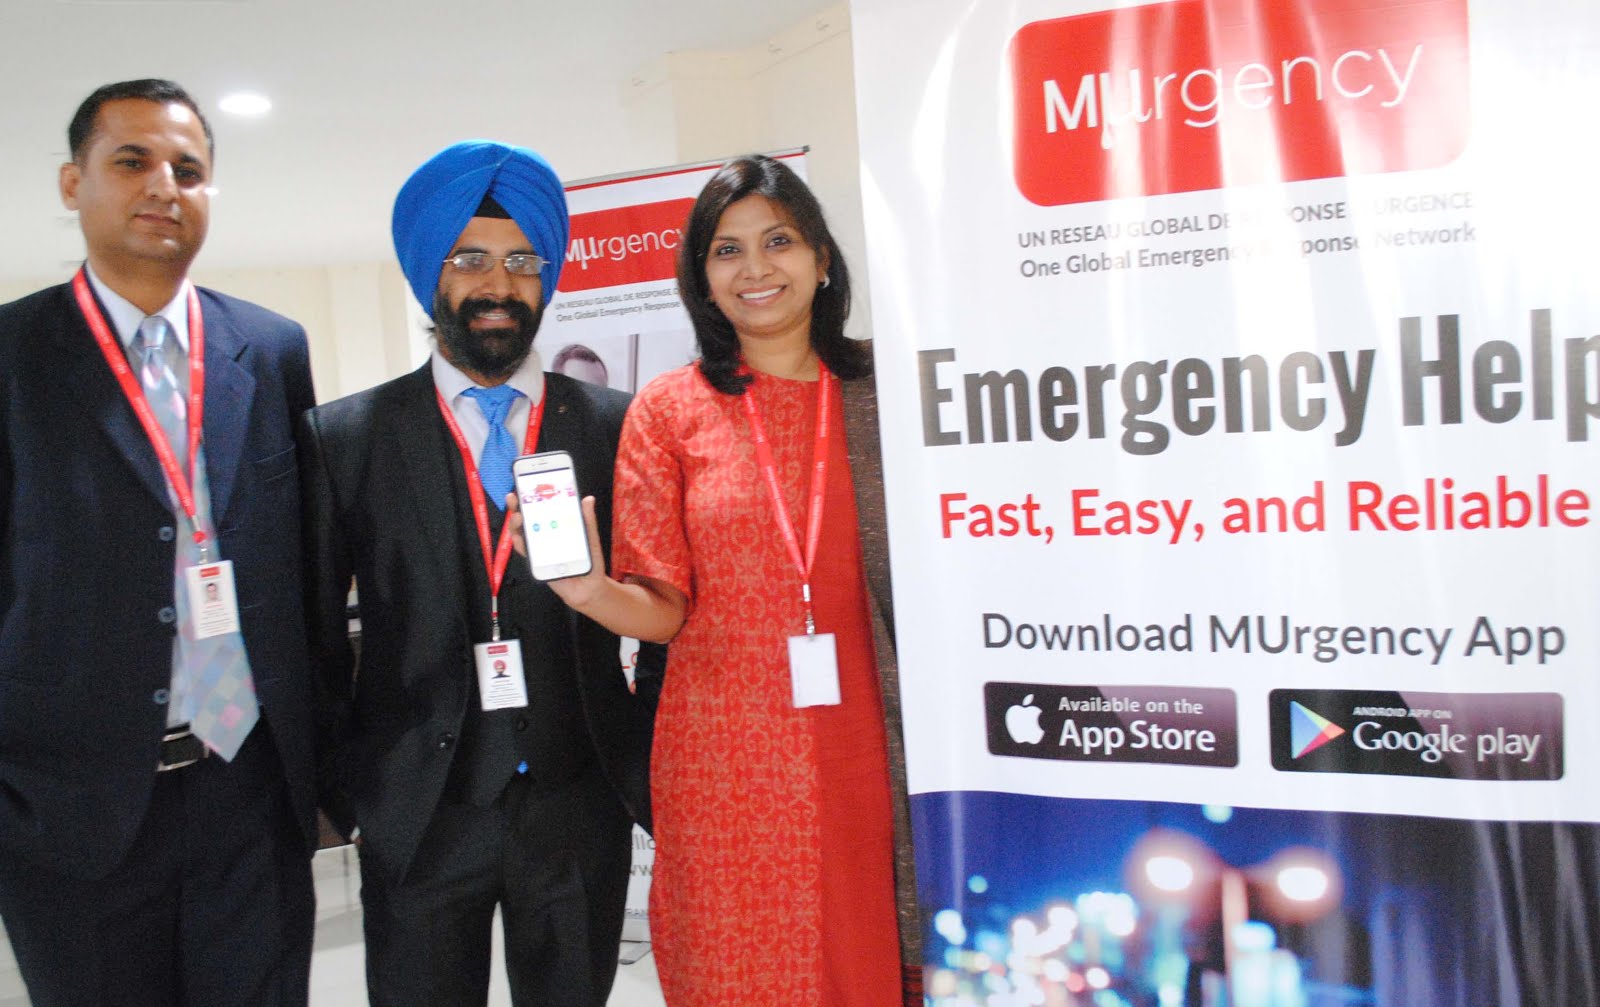 121newsonline.com: murgency inc. launches mobile app for fast easy &amp; reliable medical emergency help